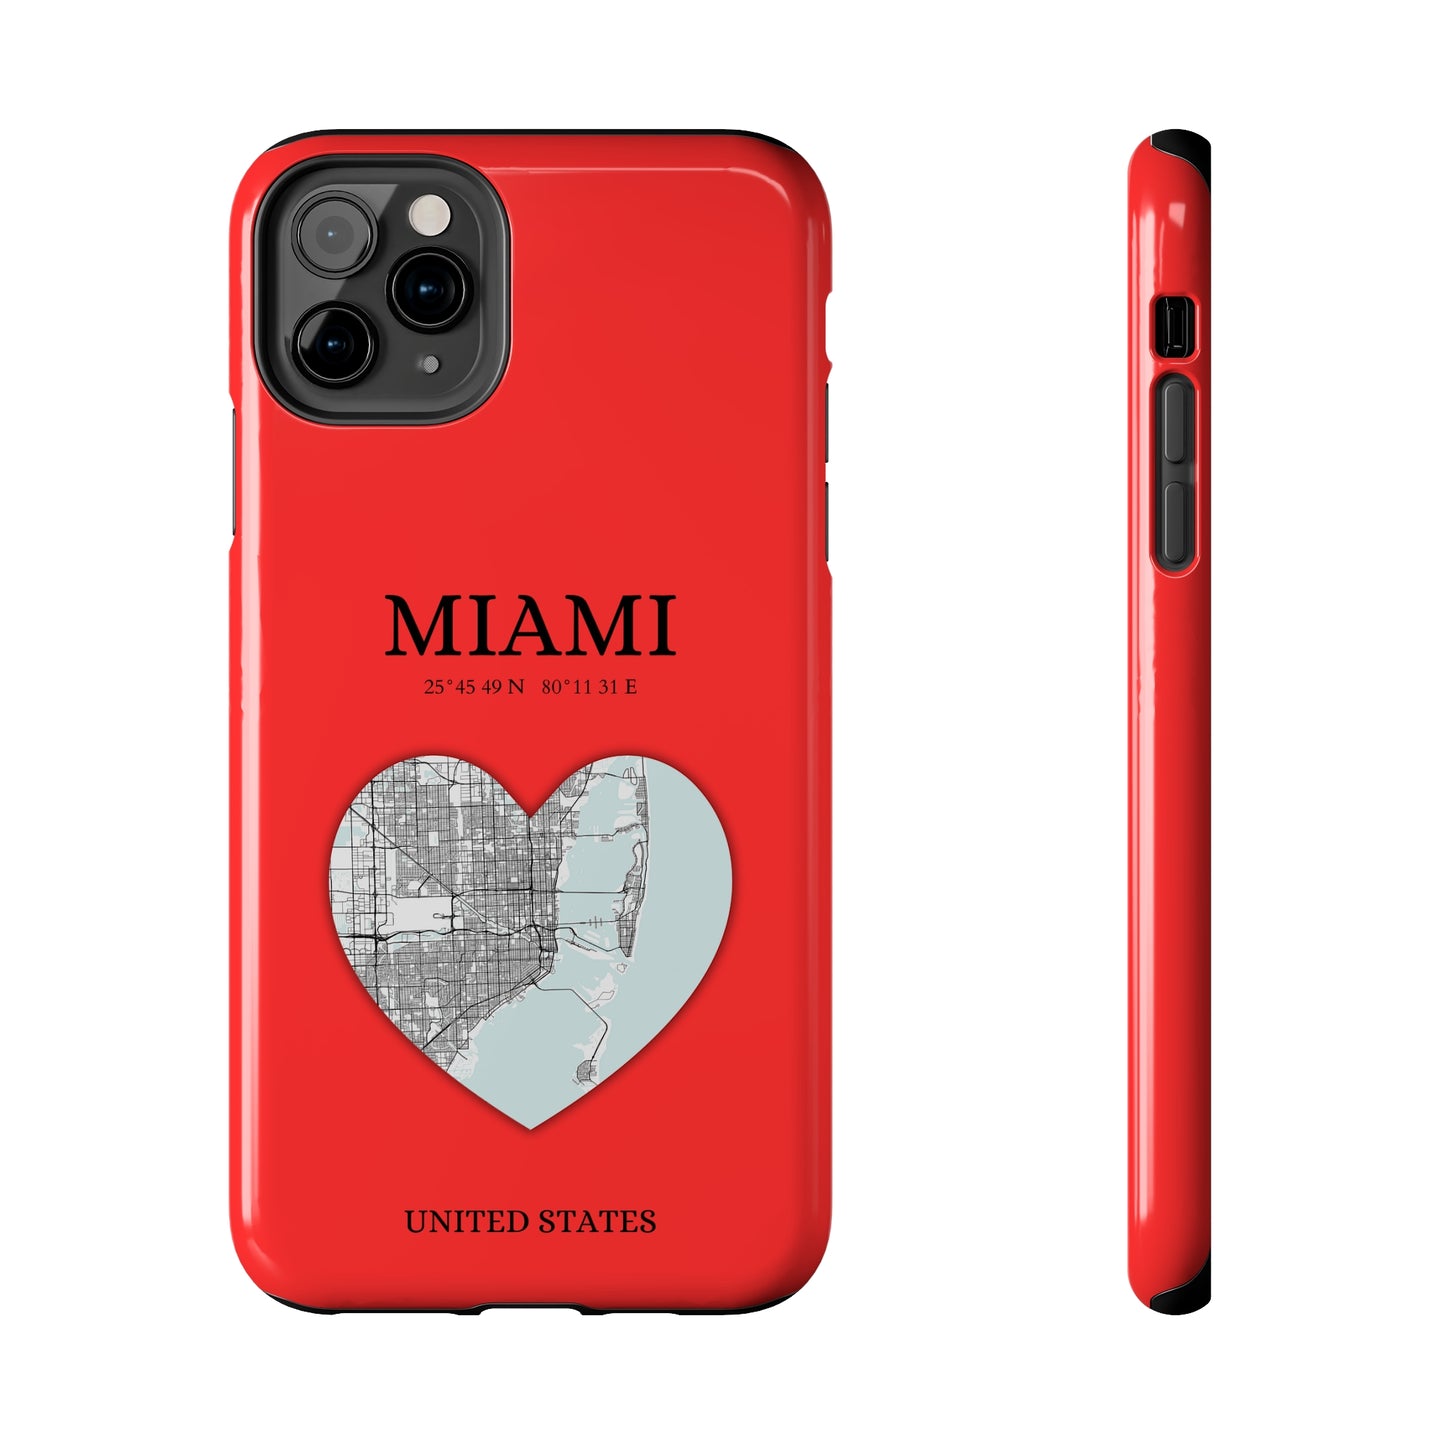 Miami Heartbeat - Red (iPhone Case 11-15)Capture the essence of MIAMI with RimaGallery's Heartbeat RED iPhone case, blending durable protection and unique design. Perfect for iPhone 11-15 models. Free shippRimaGallery